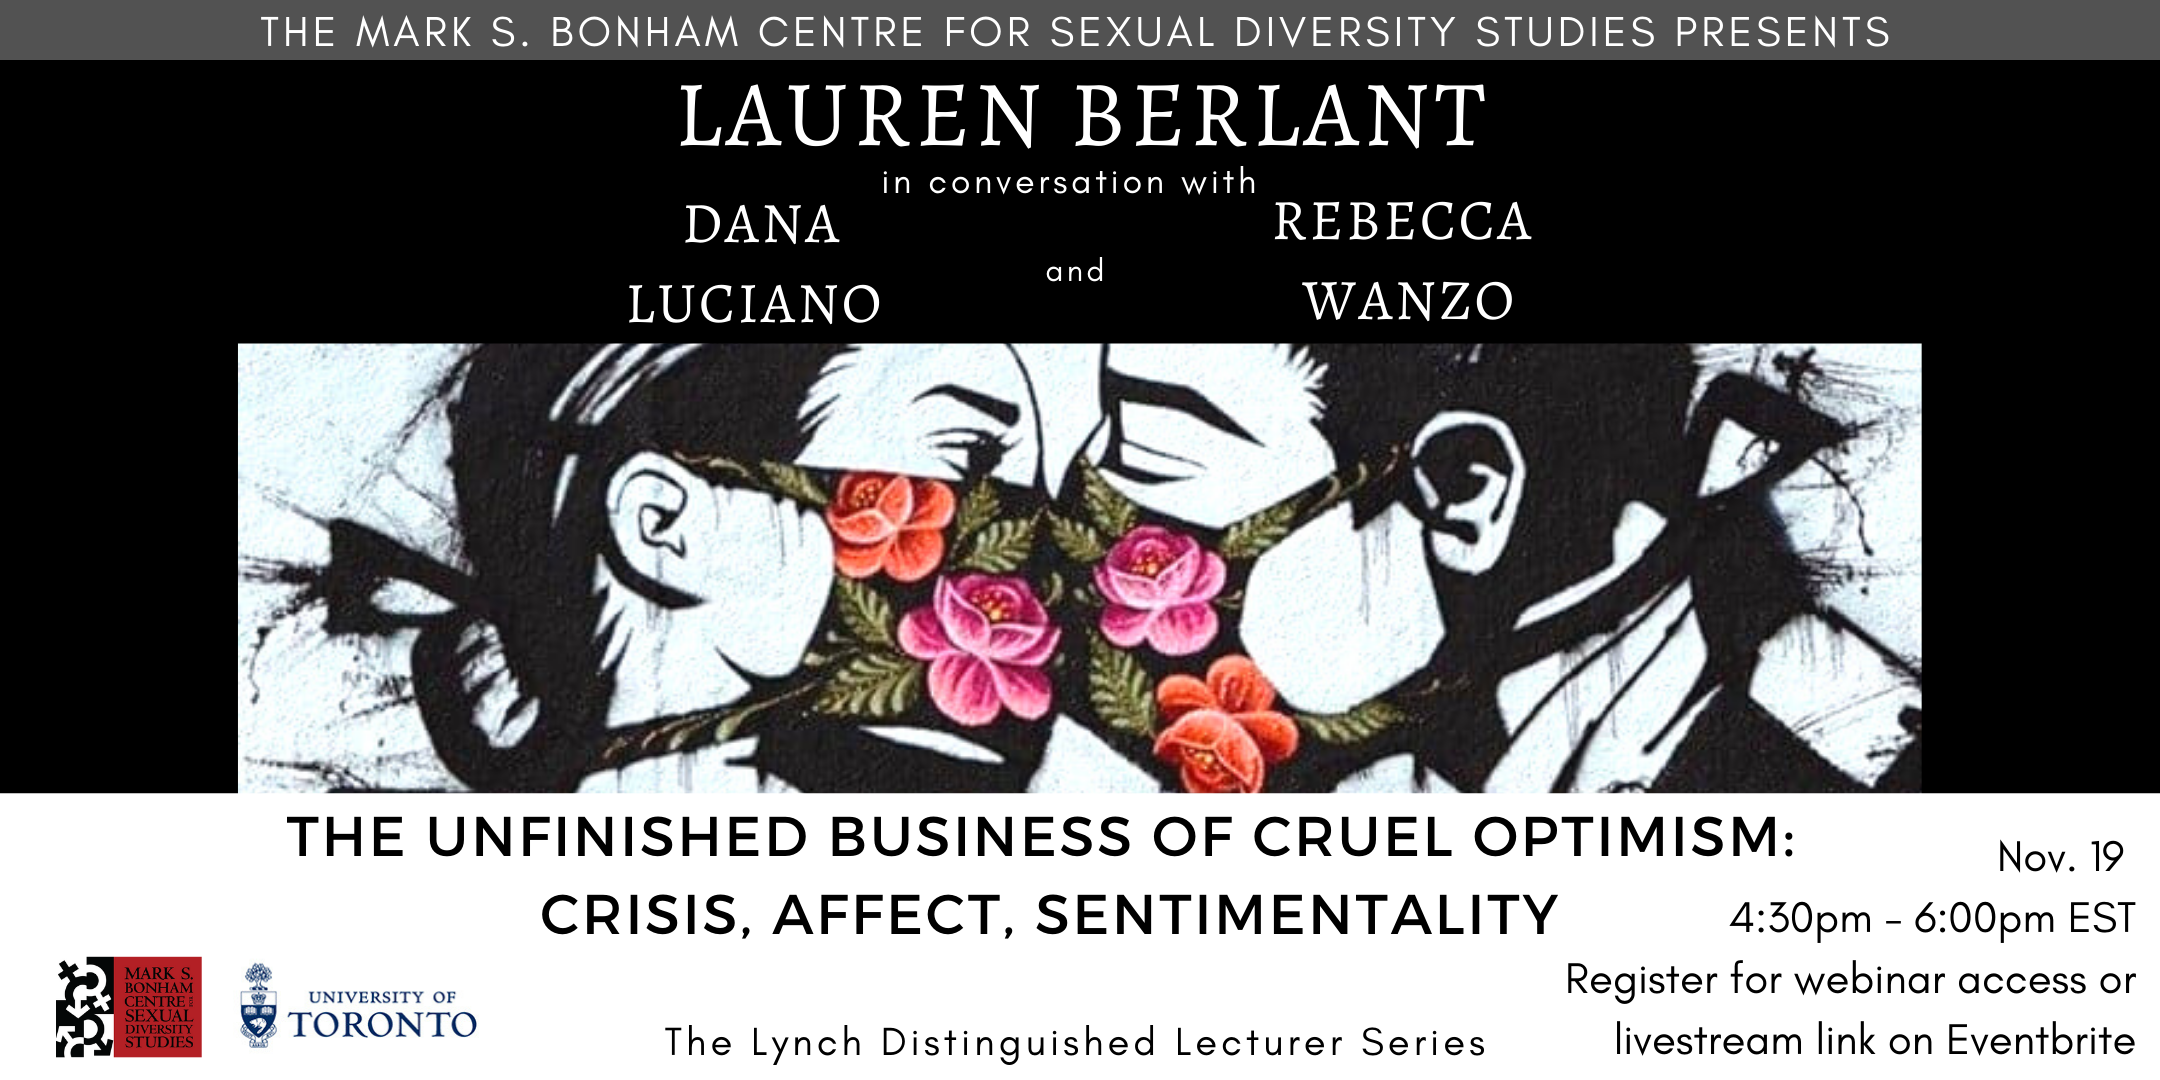 The Lynch Distinguished Lecturer Series | Lauren Berlant in Conversation with Dana Luciano and Rebecca Wanzo: The Unfinished Business of Cruel Optimism